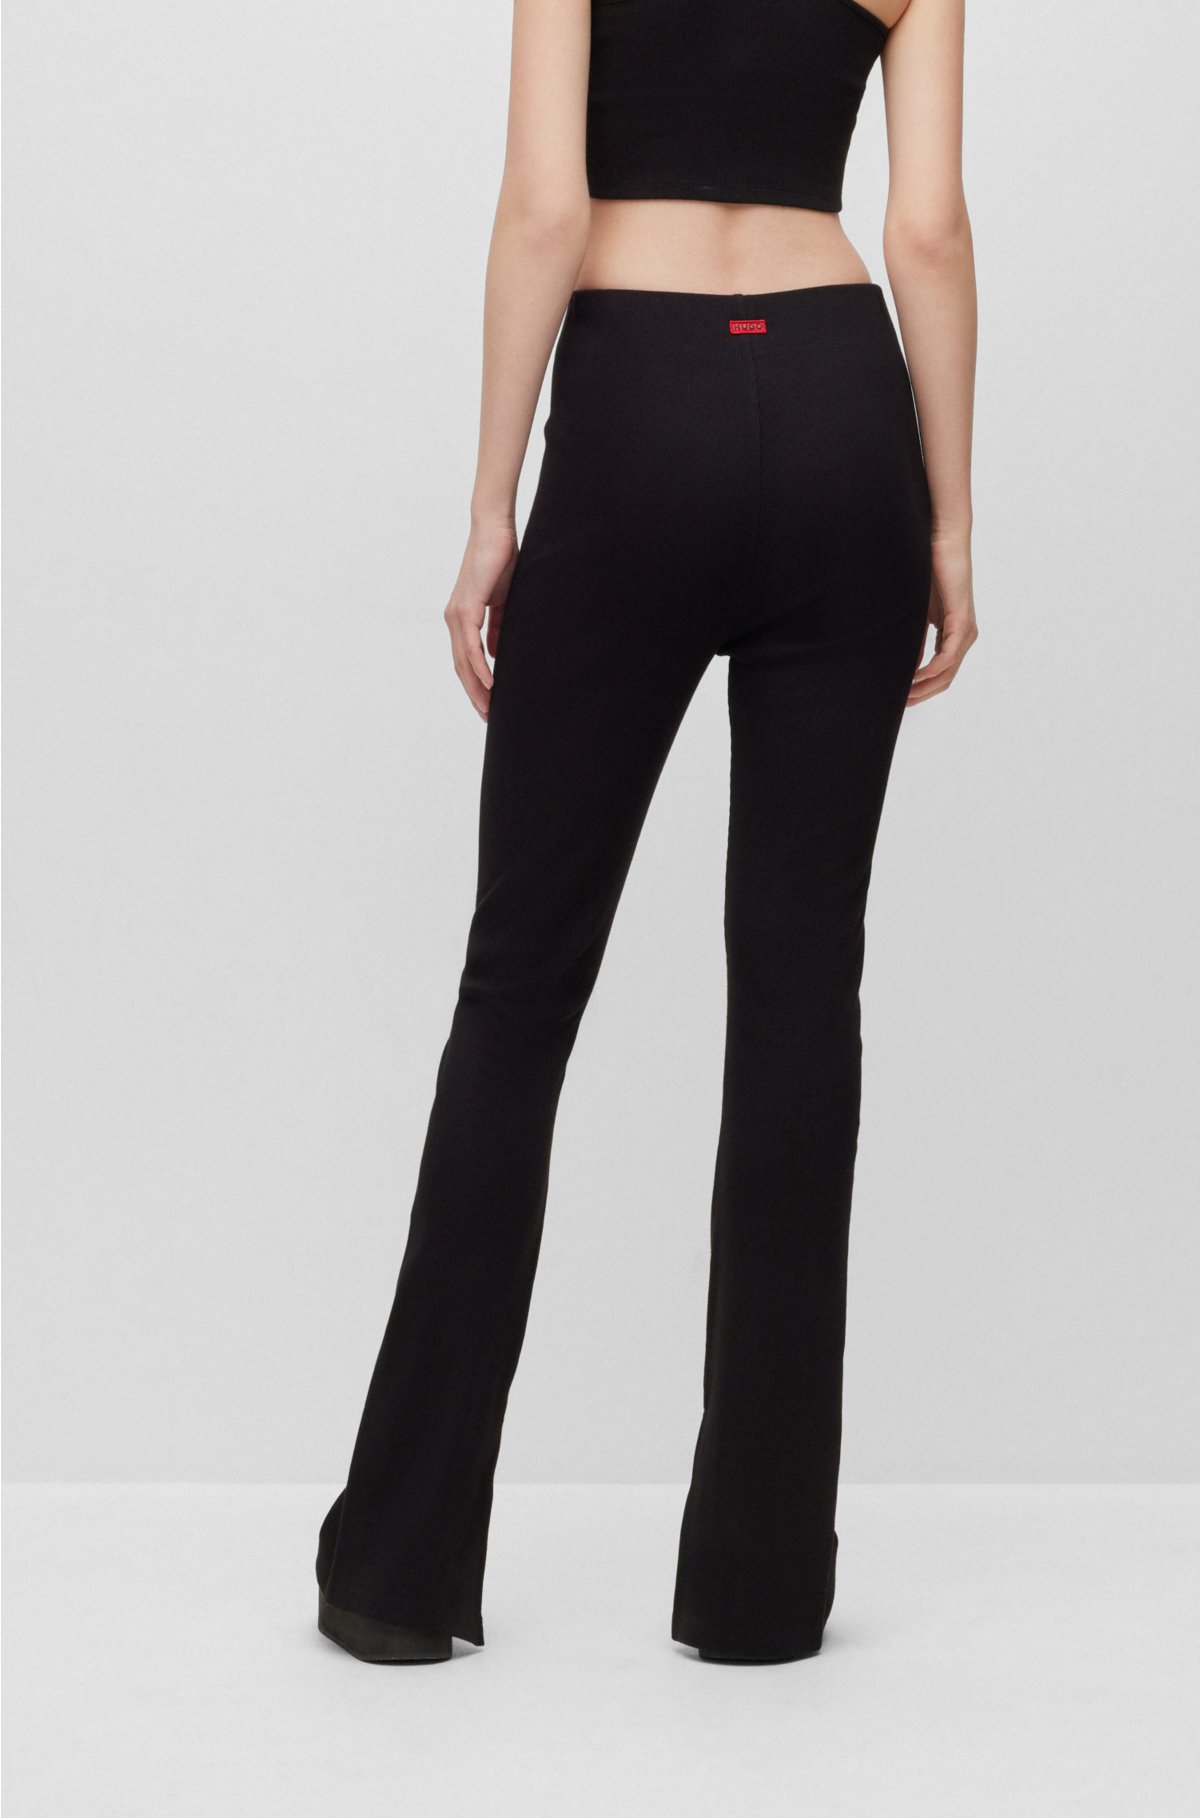 High-waisted flared leggings in stretch cotton, Black